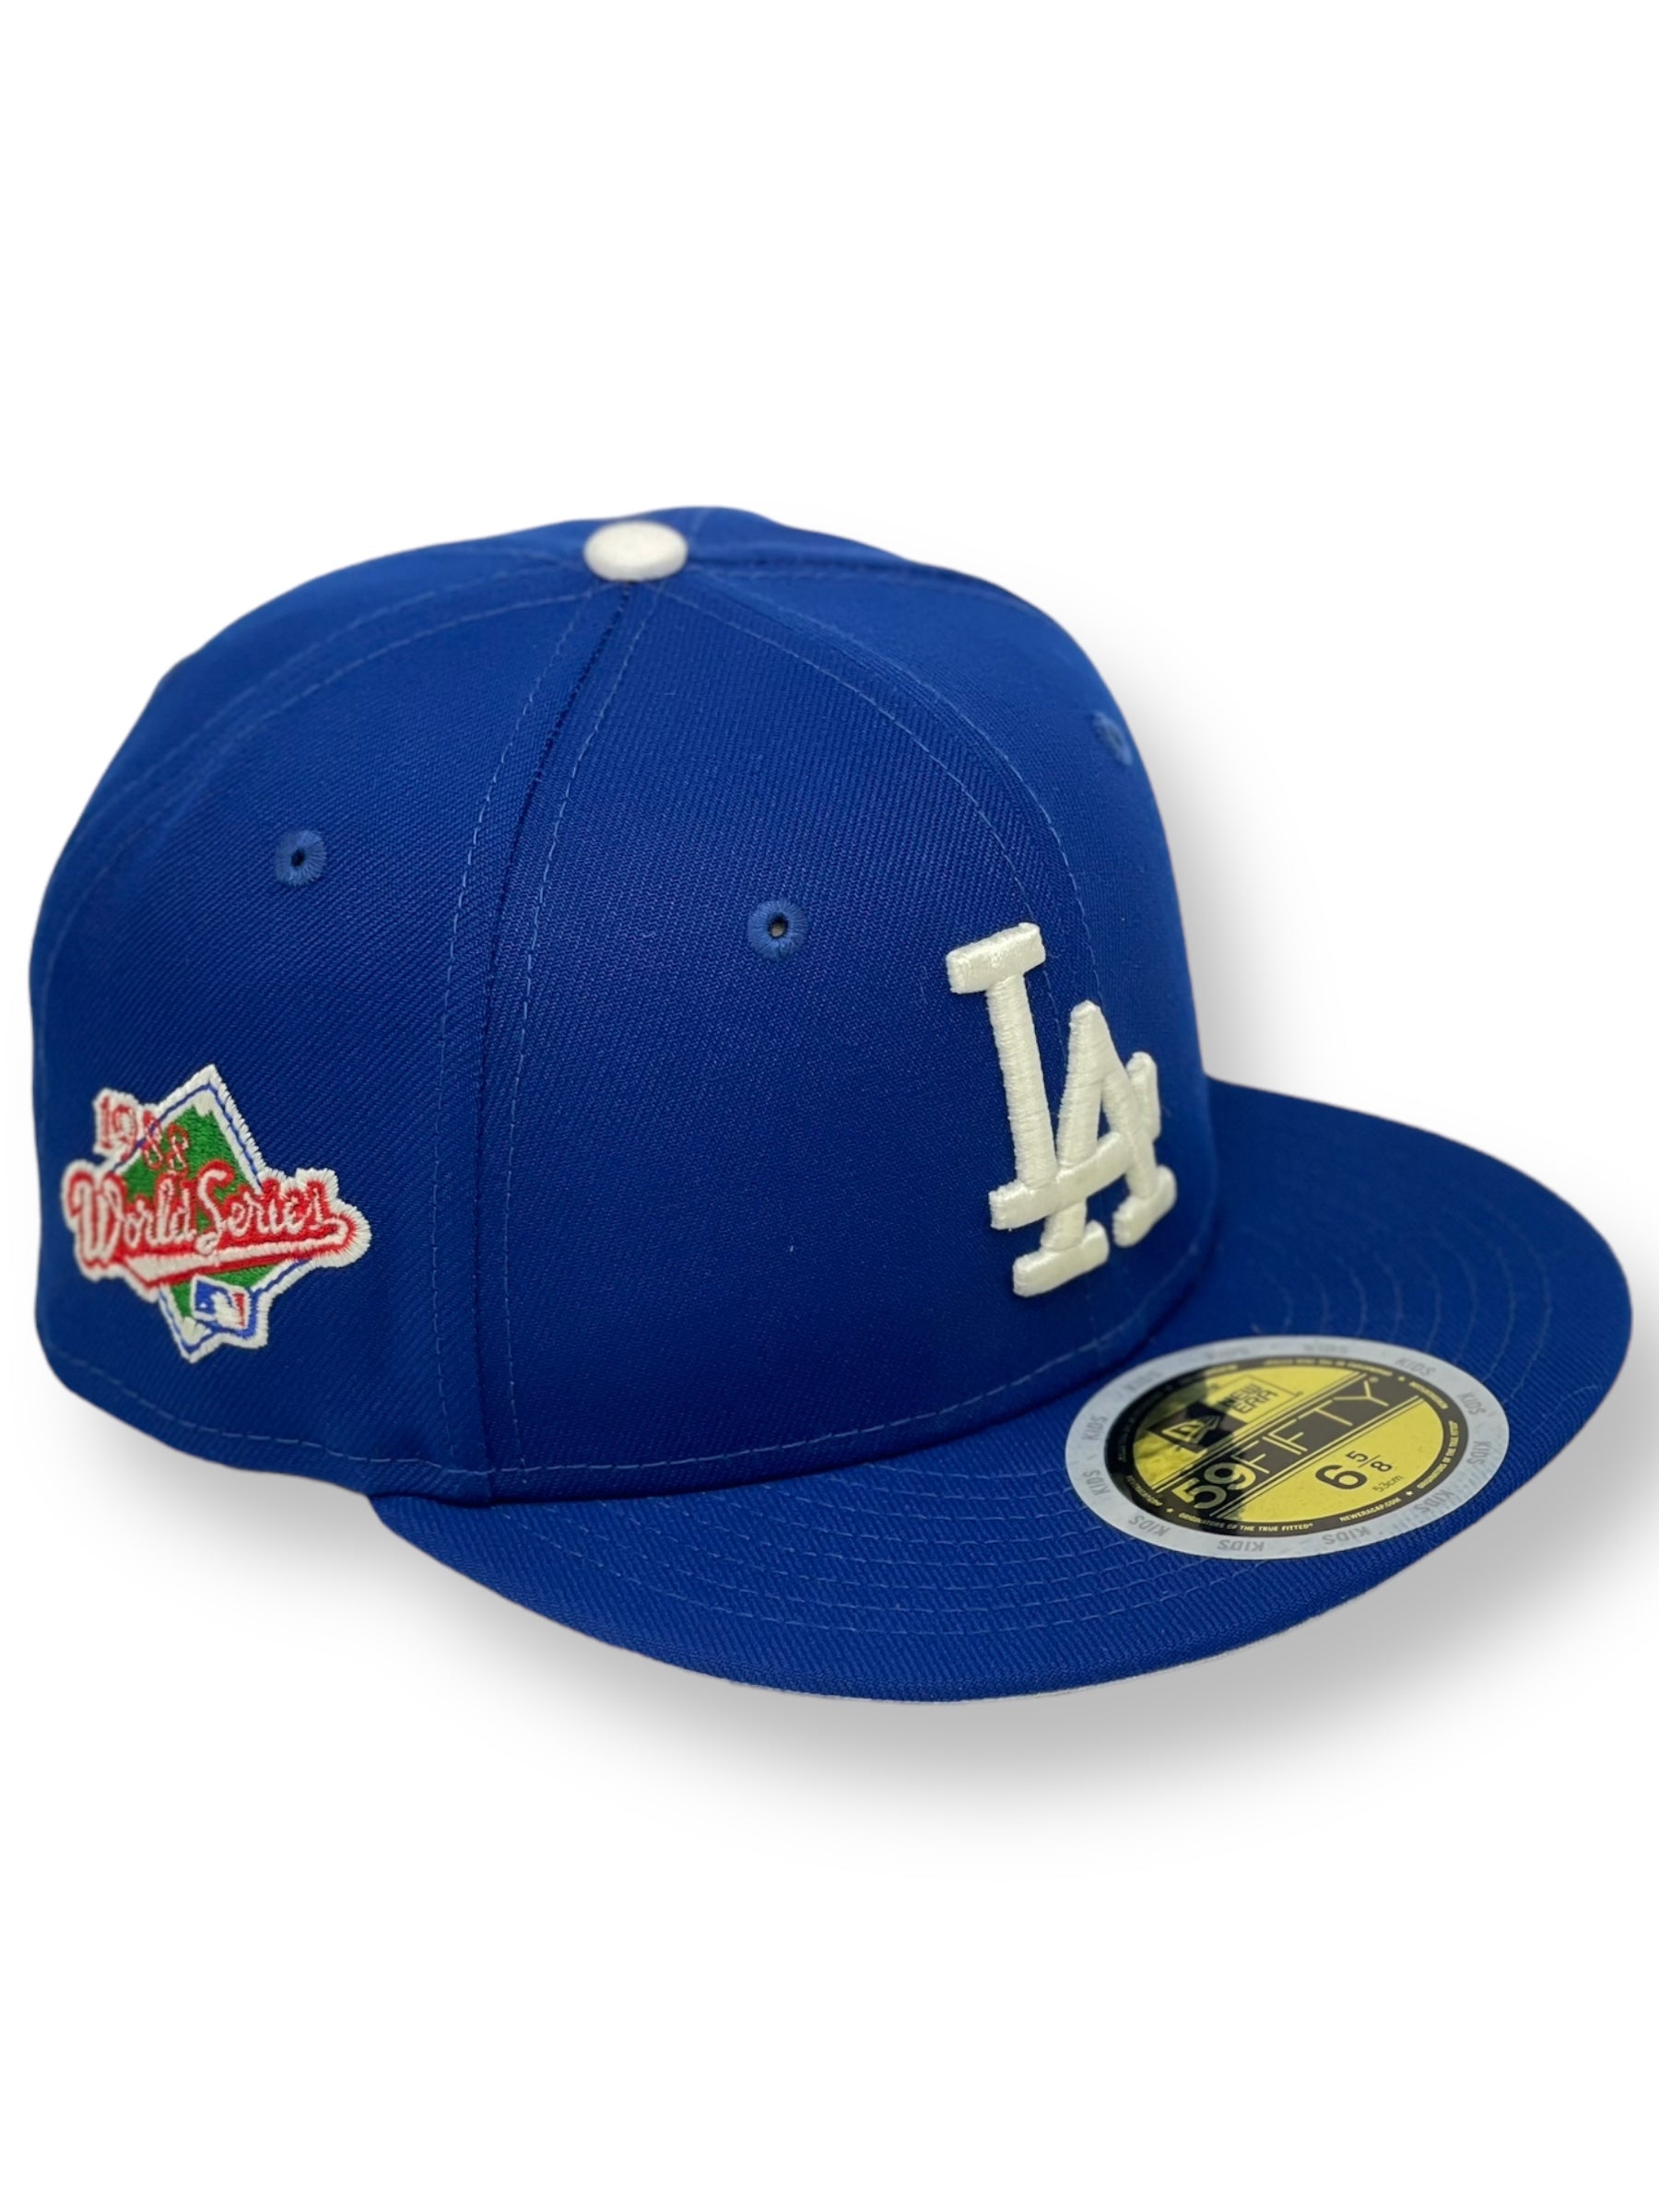 "KIDS" LOS ANGELES DODGERS "1988 WORLDSERIES" NEW ERA 59FIFTY FITTED